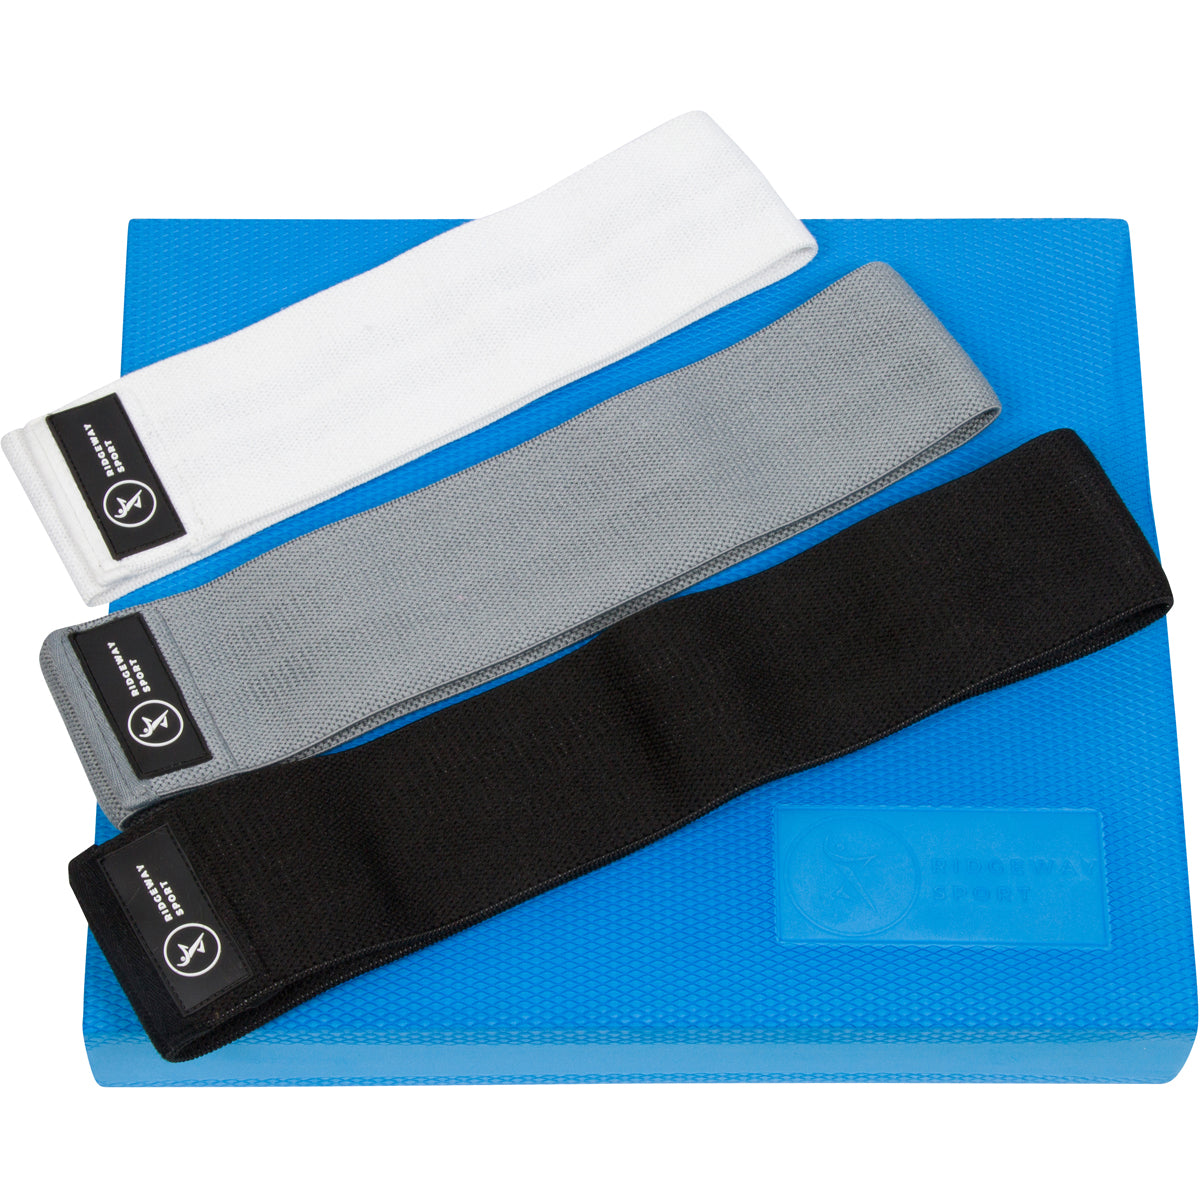 Foam Exercise Pad and Resistance Band Set